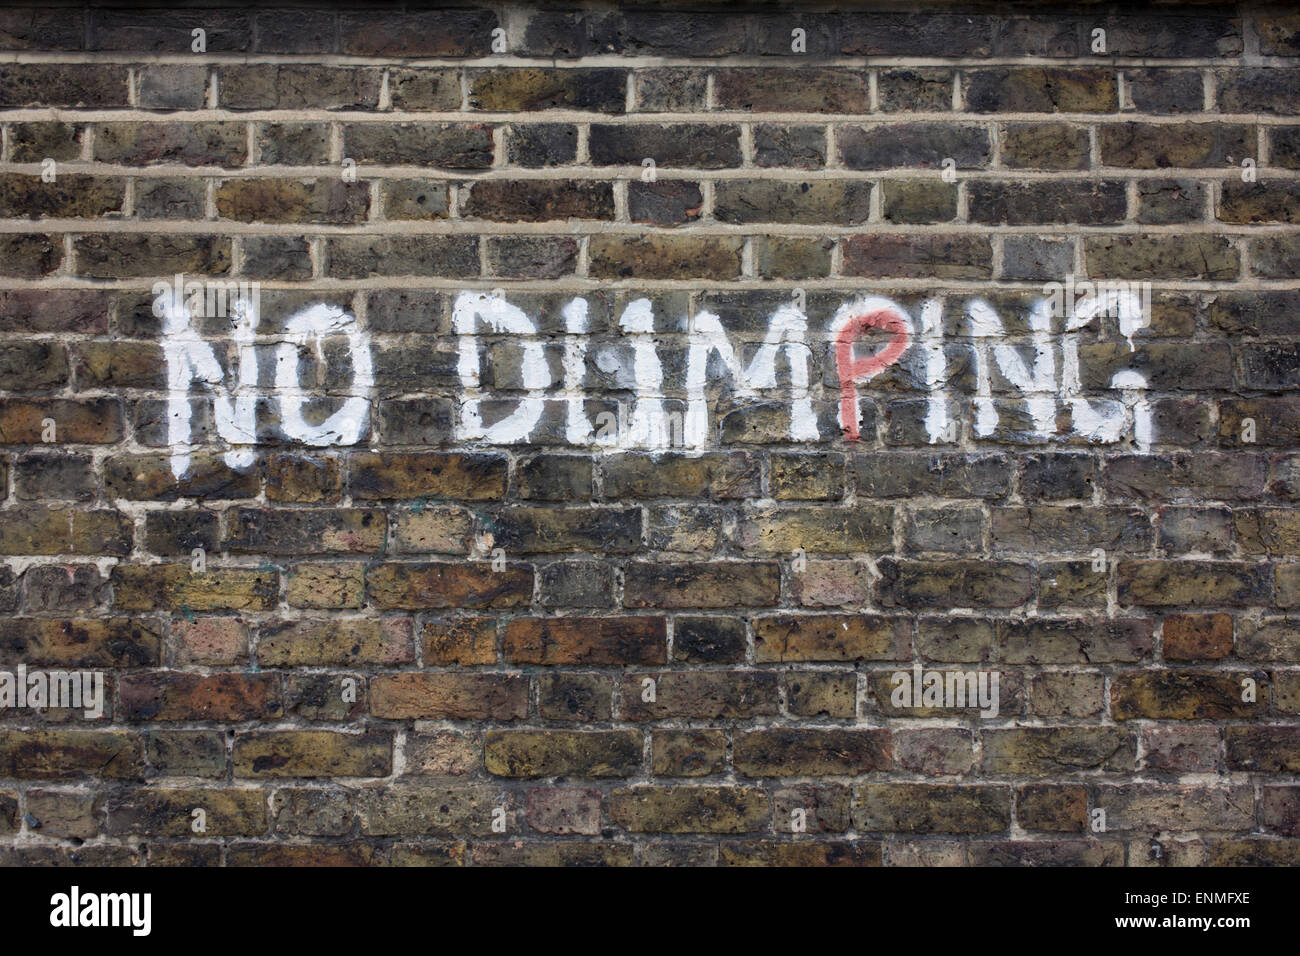 No Dumping writing painted on an urban brick wall in the south London borough of Lewisham, SE5. Stock Photo